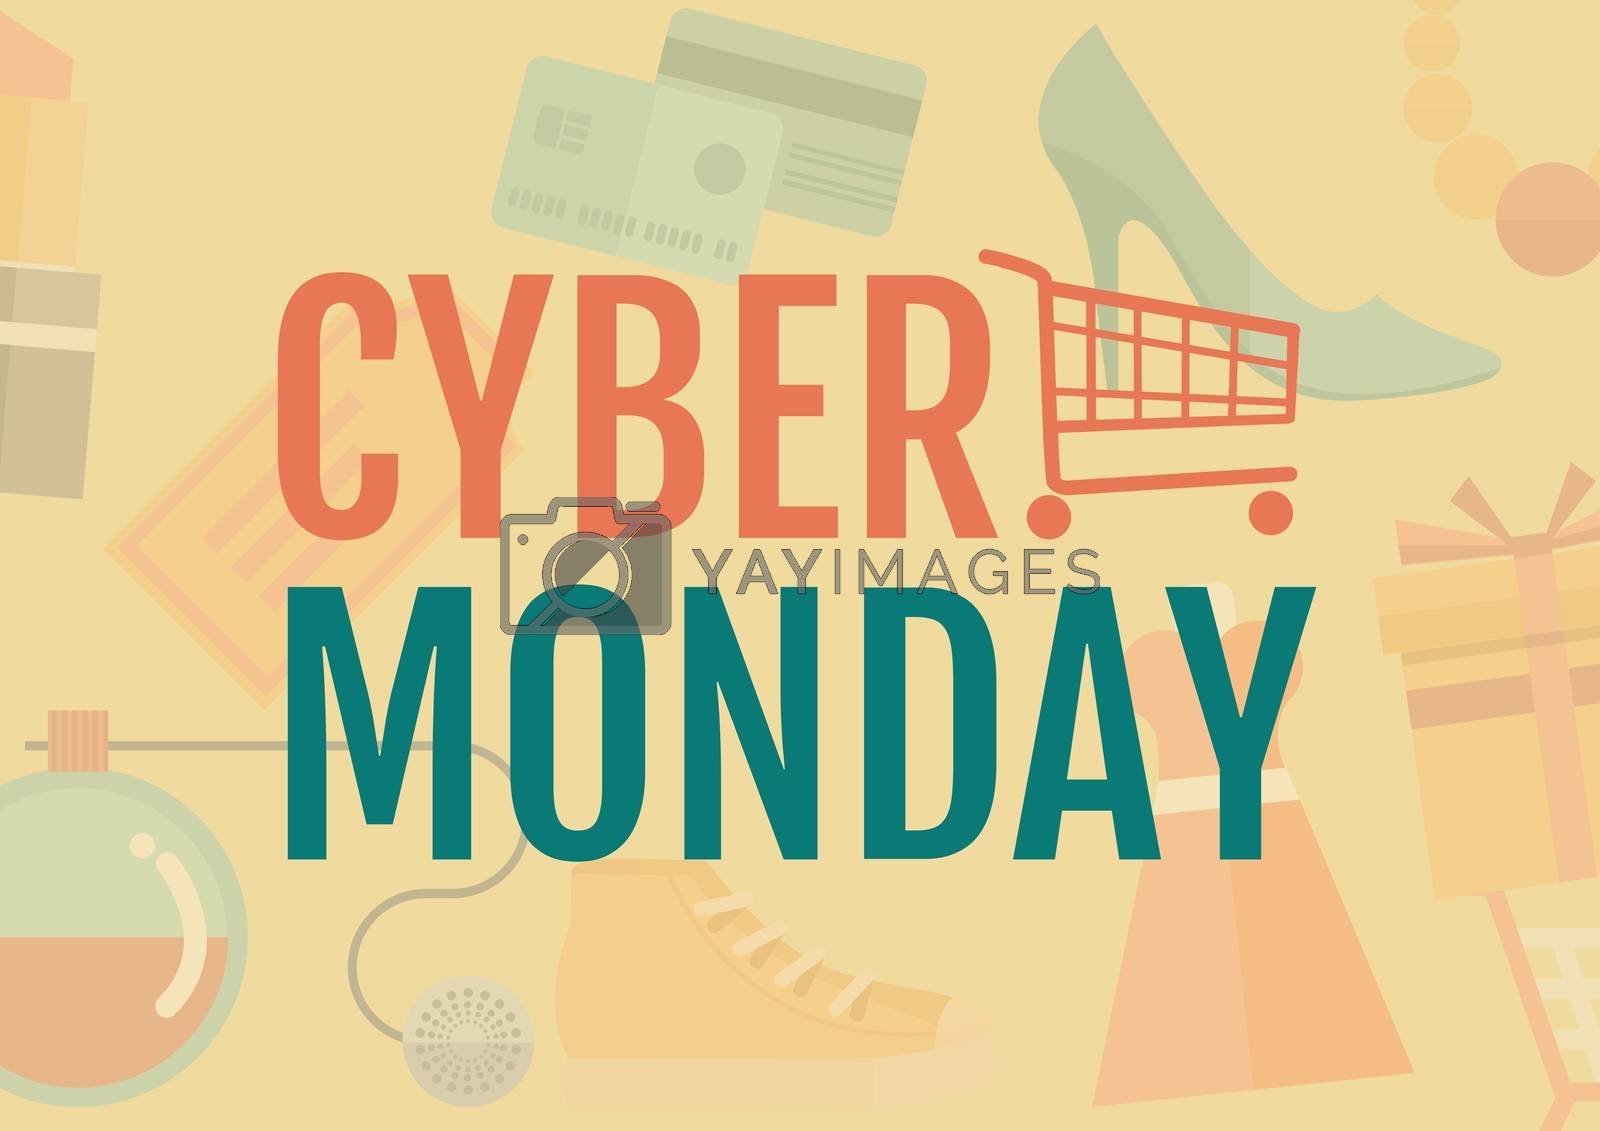 Royalty free image of Cyber Monday Sale with illustrated elements in orange and green by Wavebreakmedia